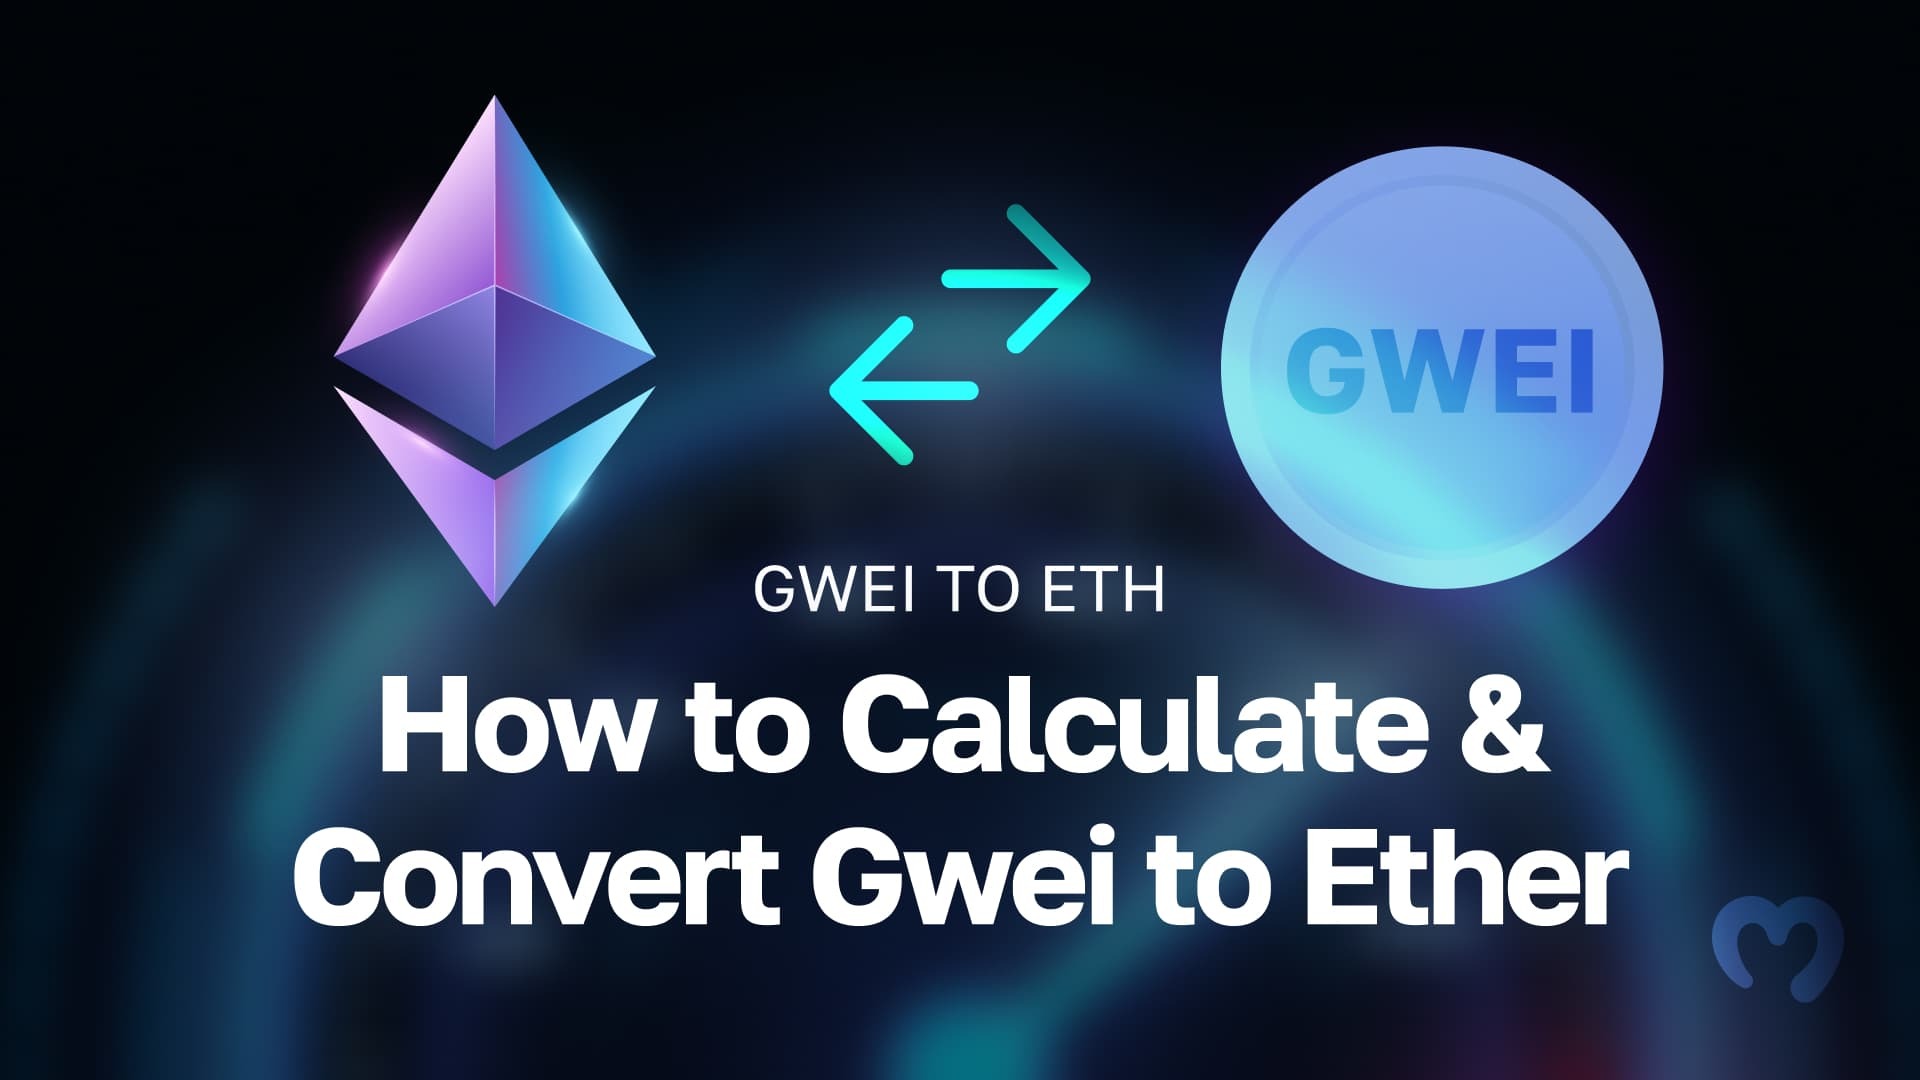 The Daily Gwei - An Ethereum Podcast